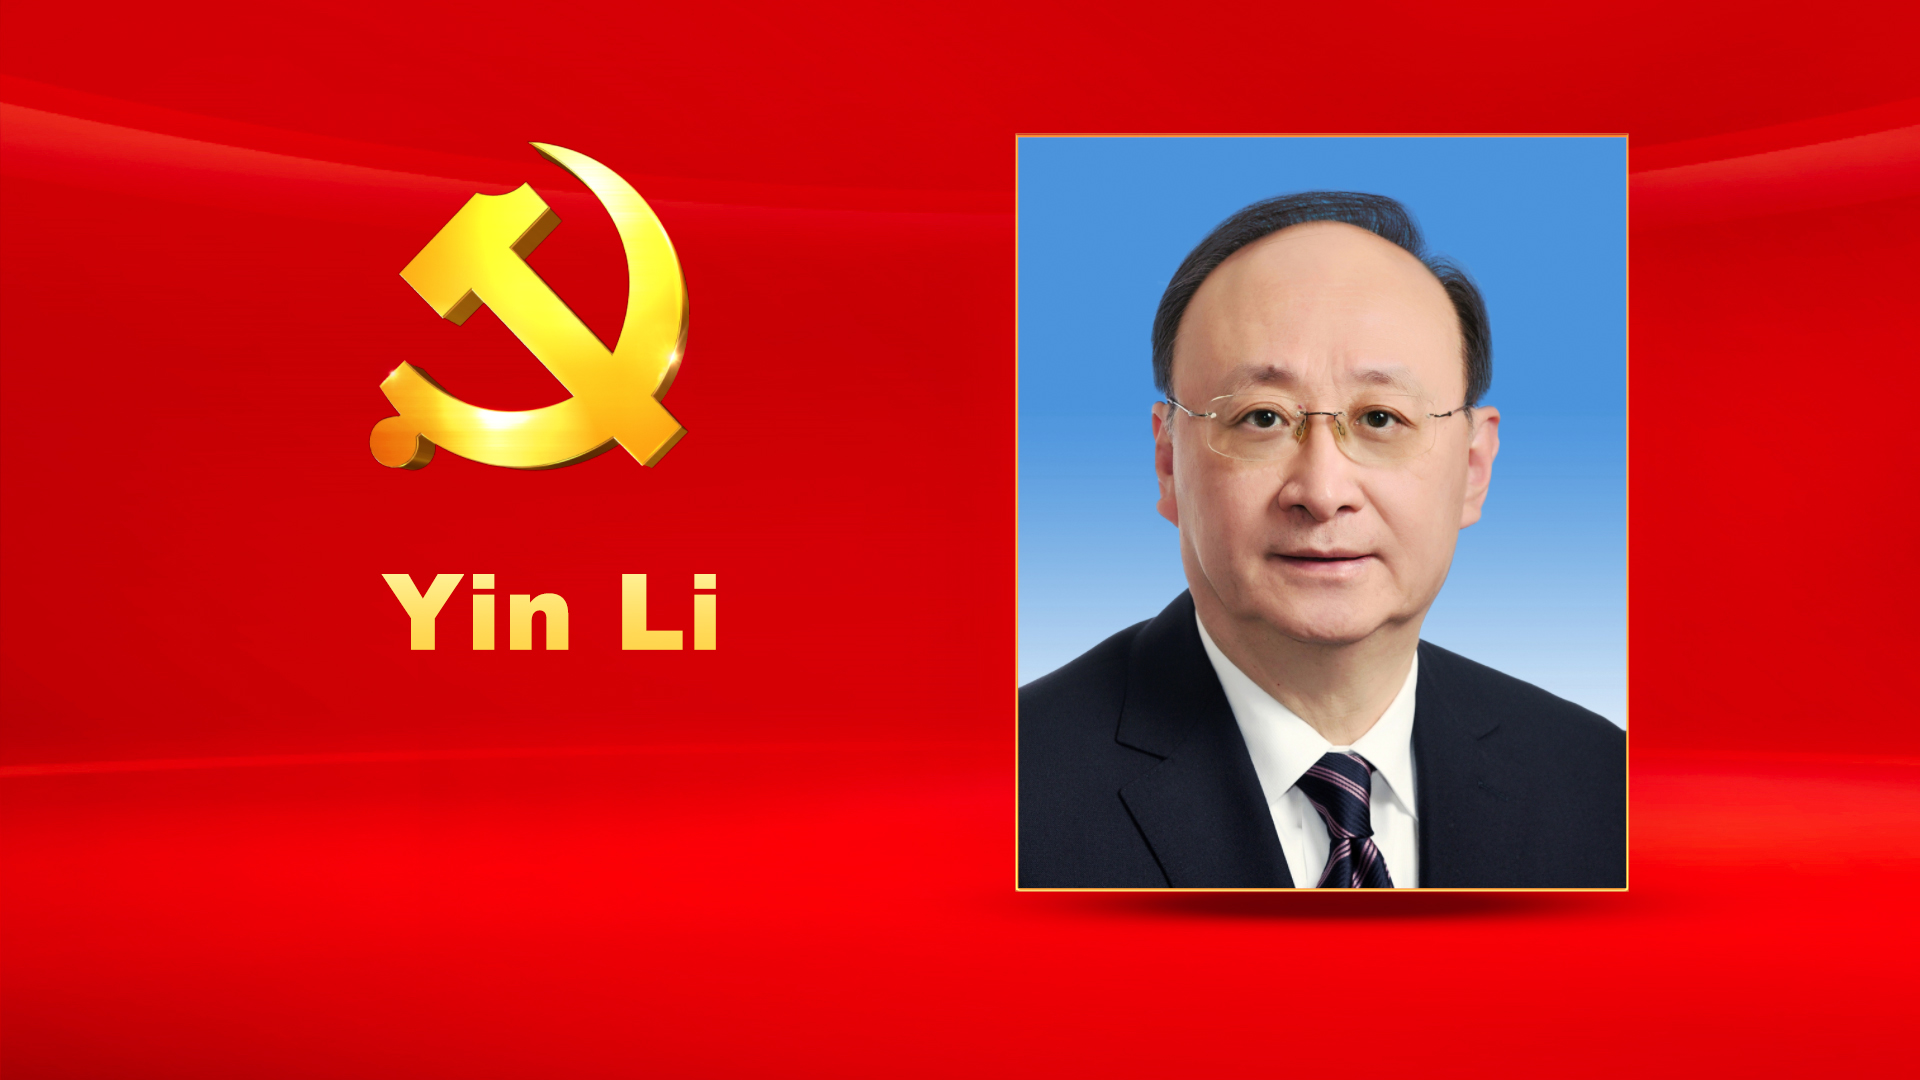 Yin Li, male, Han ethnicity, was born in August 1962 and is from Linyi, Shandong Province. He began his first job in September 1987 and joined the Communist Party of China (CPC) in June 1983. Yin graduated from Semashko Research Institute of Social Hygiene, Economics and Public Health Management, Russian Academy of Medical Sciences where he completed a graduate program in health economics and health management. He holds a Doctor of Medical Science degree. Yin is currently a member of the CPC Central Committee Political Bureau, Secretary of the CPC Fujian Provincial Committee, and Chairman of the Standing Committee of the Fujian Provincial People's Congress.